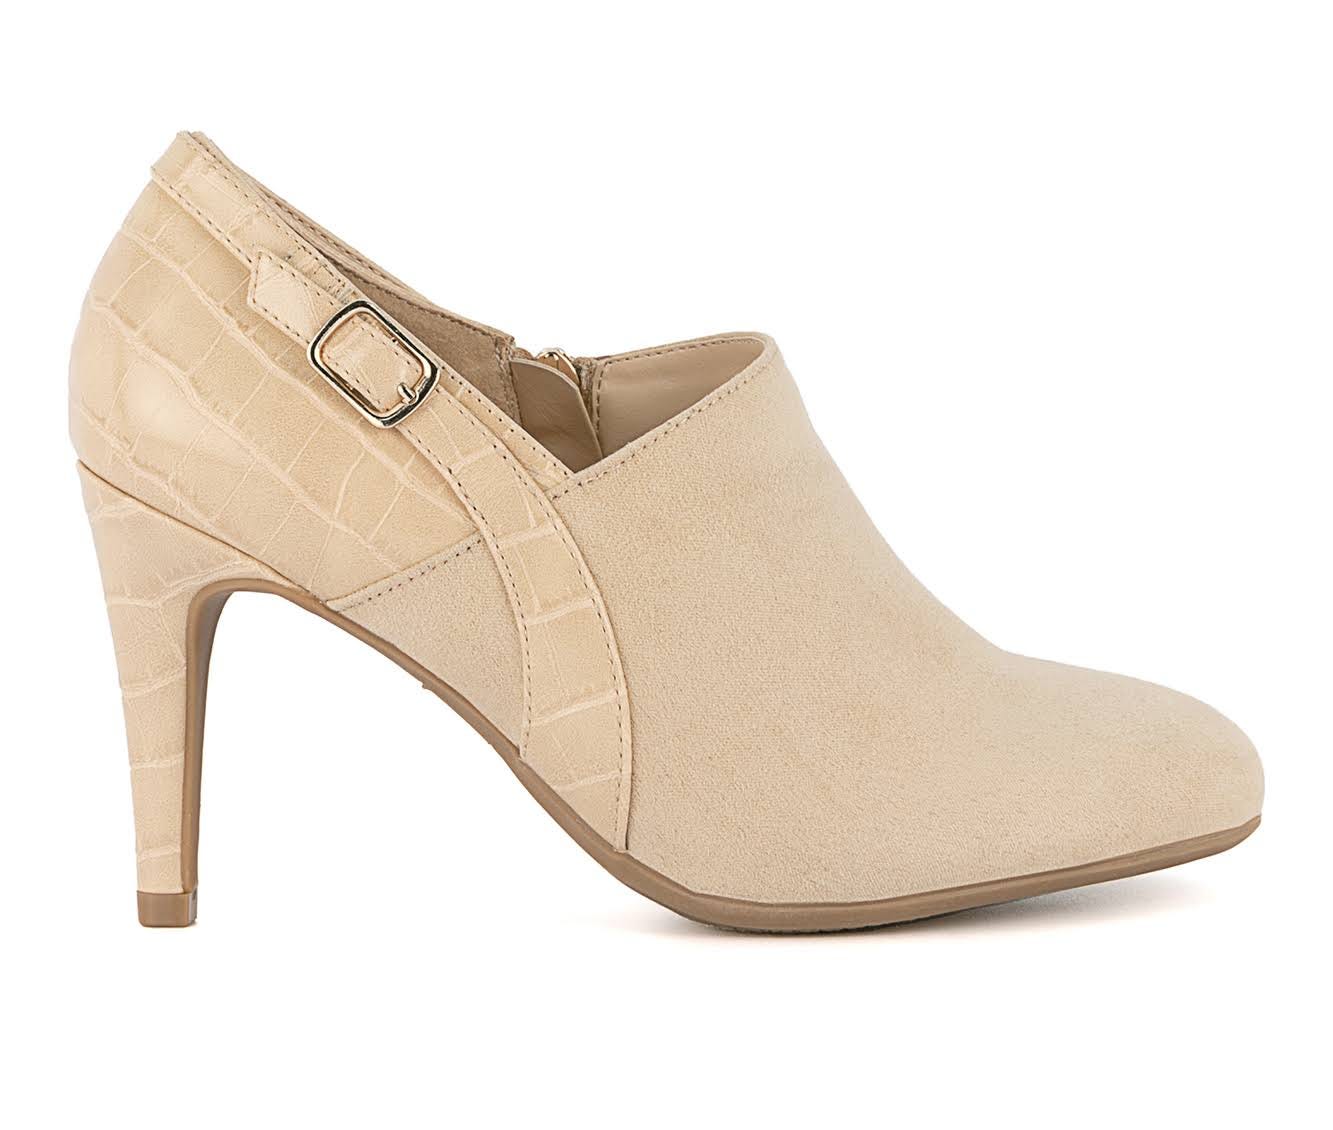 Elegant Light Natural Beige Ankle Booties with Memory Foam Insole | Image